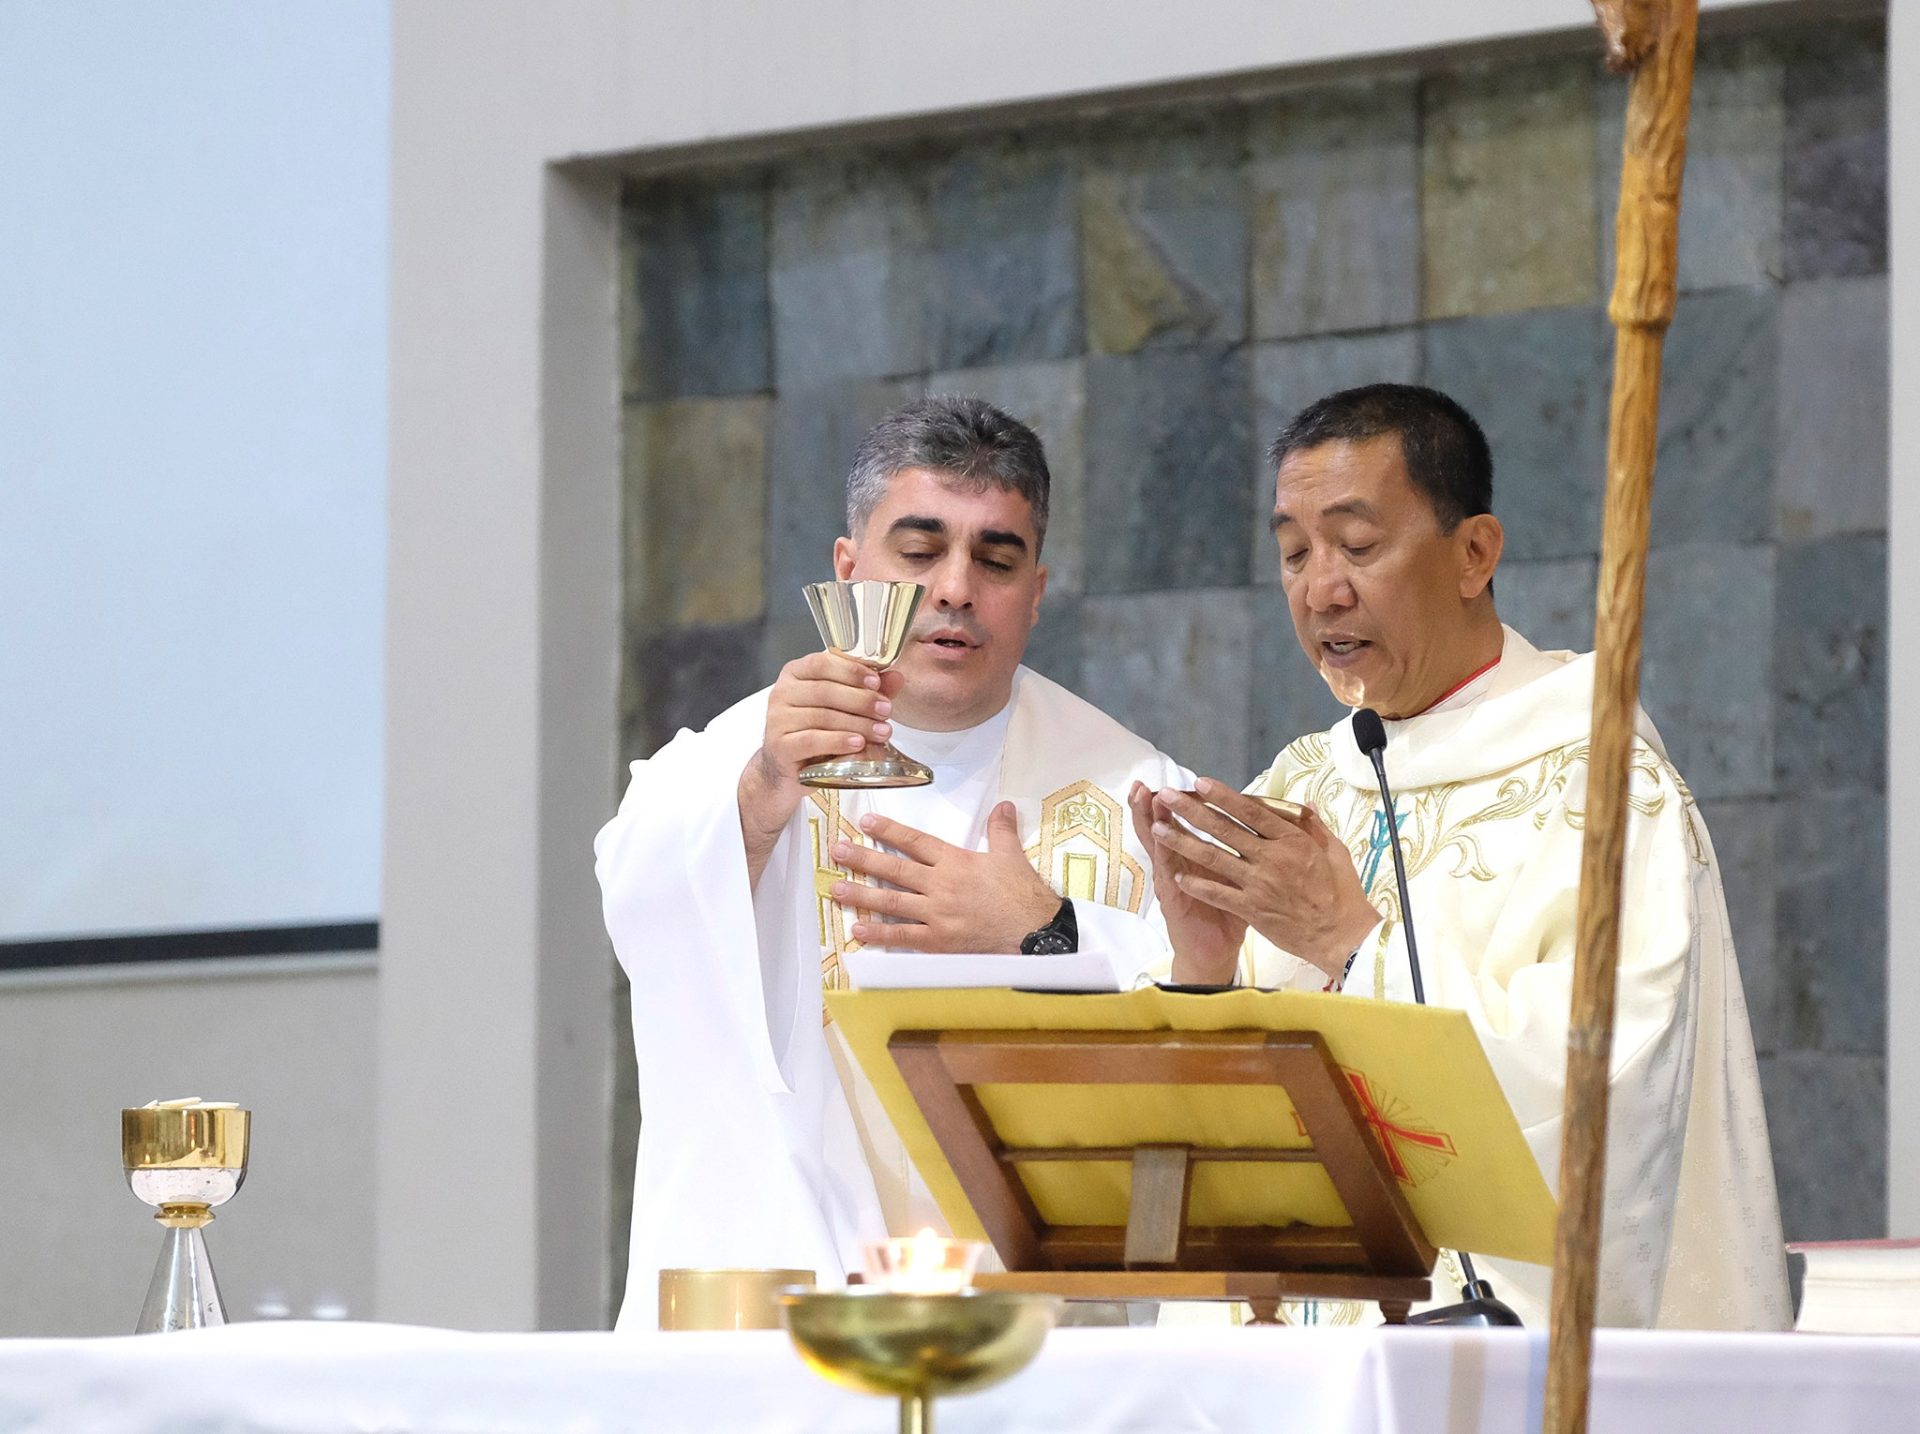 Fr David Domingues celebrates Mass, specifically the liturgy of the Eucharist. He holds aloft a chalice.